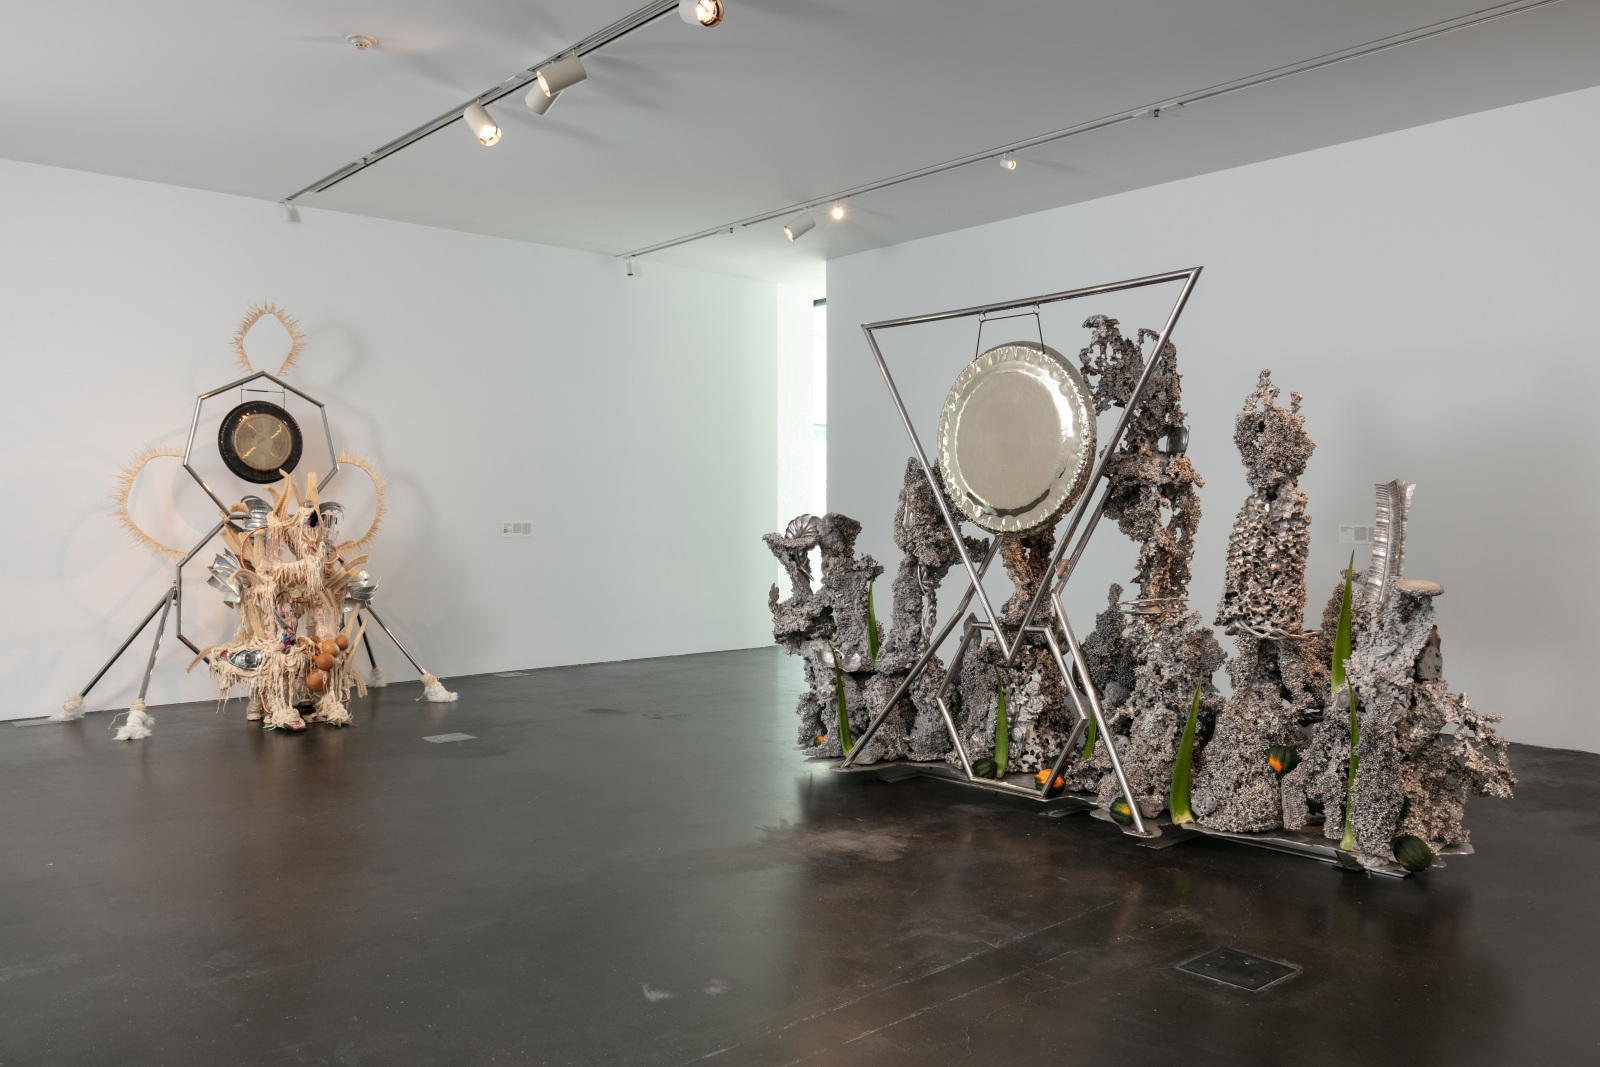 Guadalupe Maravilla: Purring Monsters with Mirrors on Their Backs - Museum of Contemporary Art, Denver - Exhibitions - PPOW